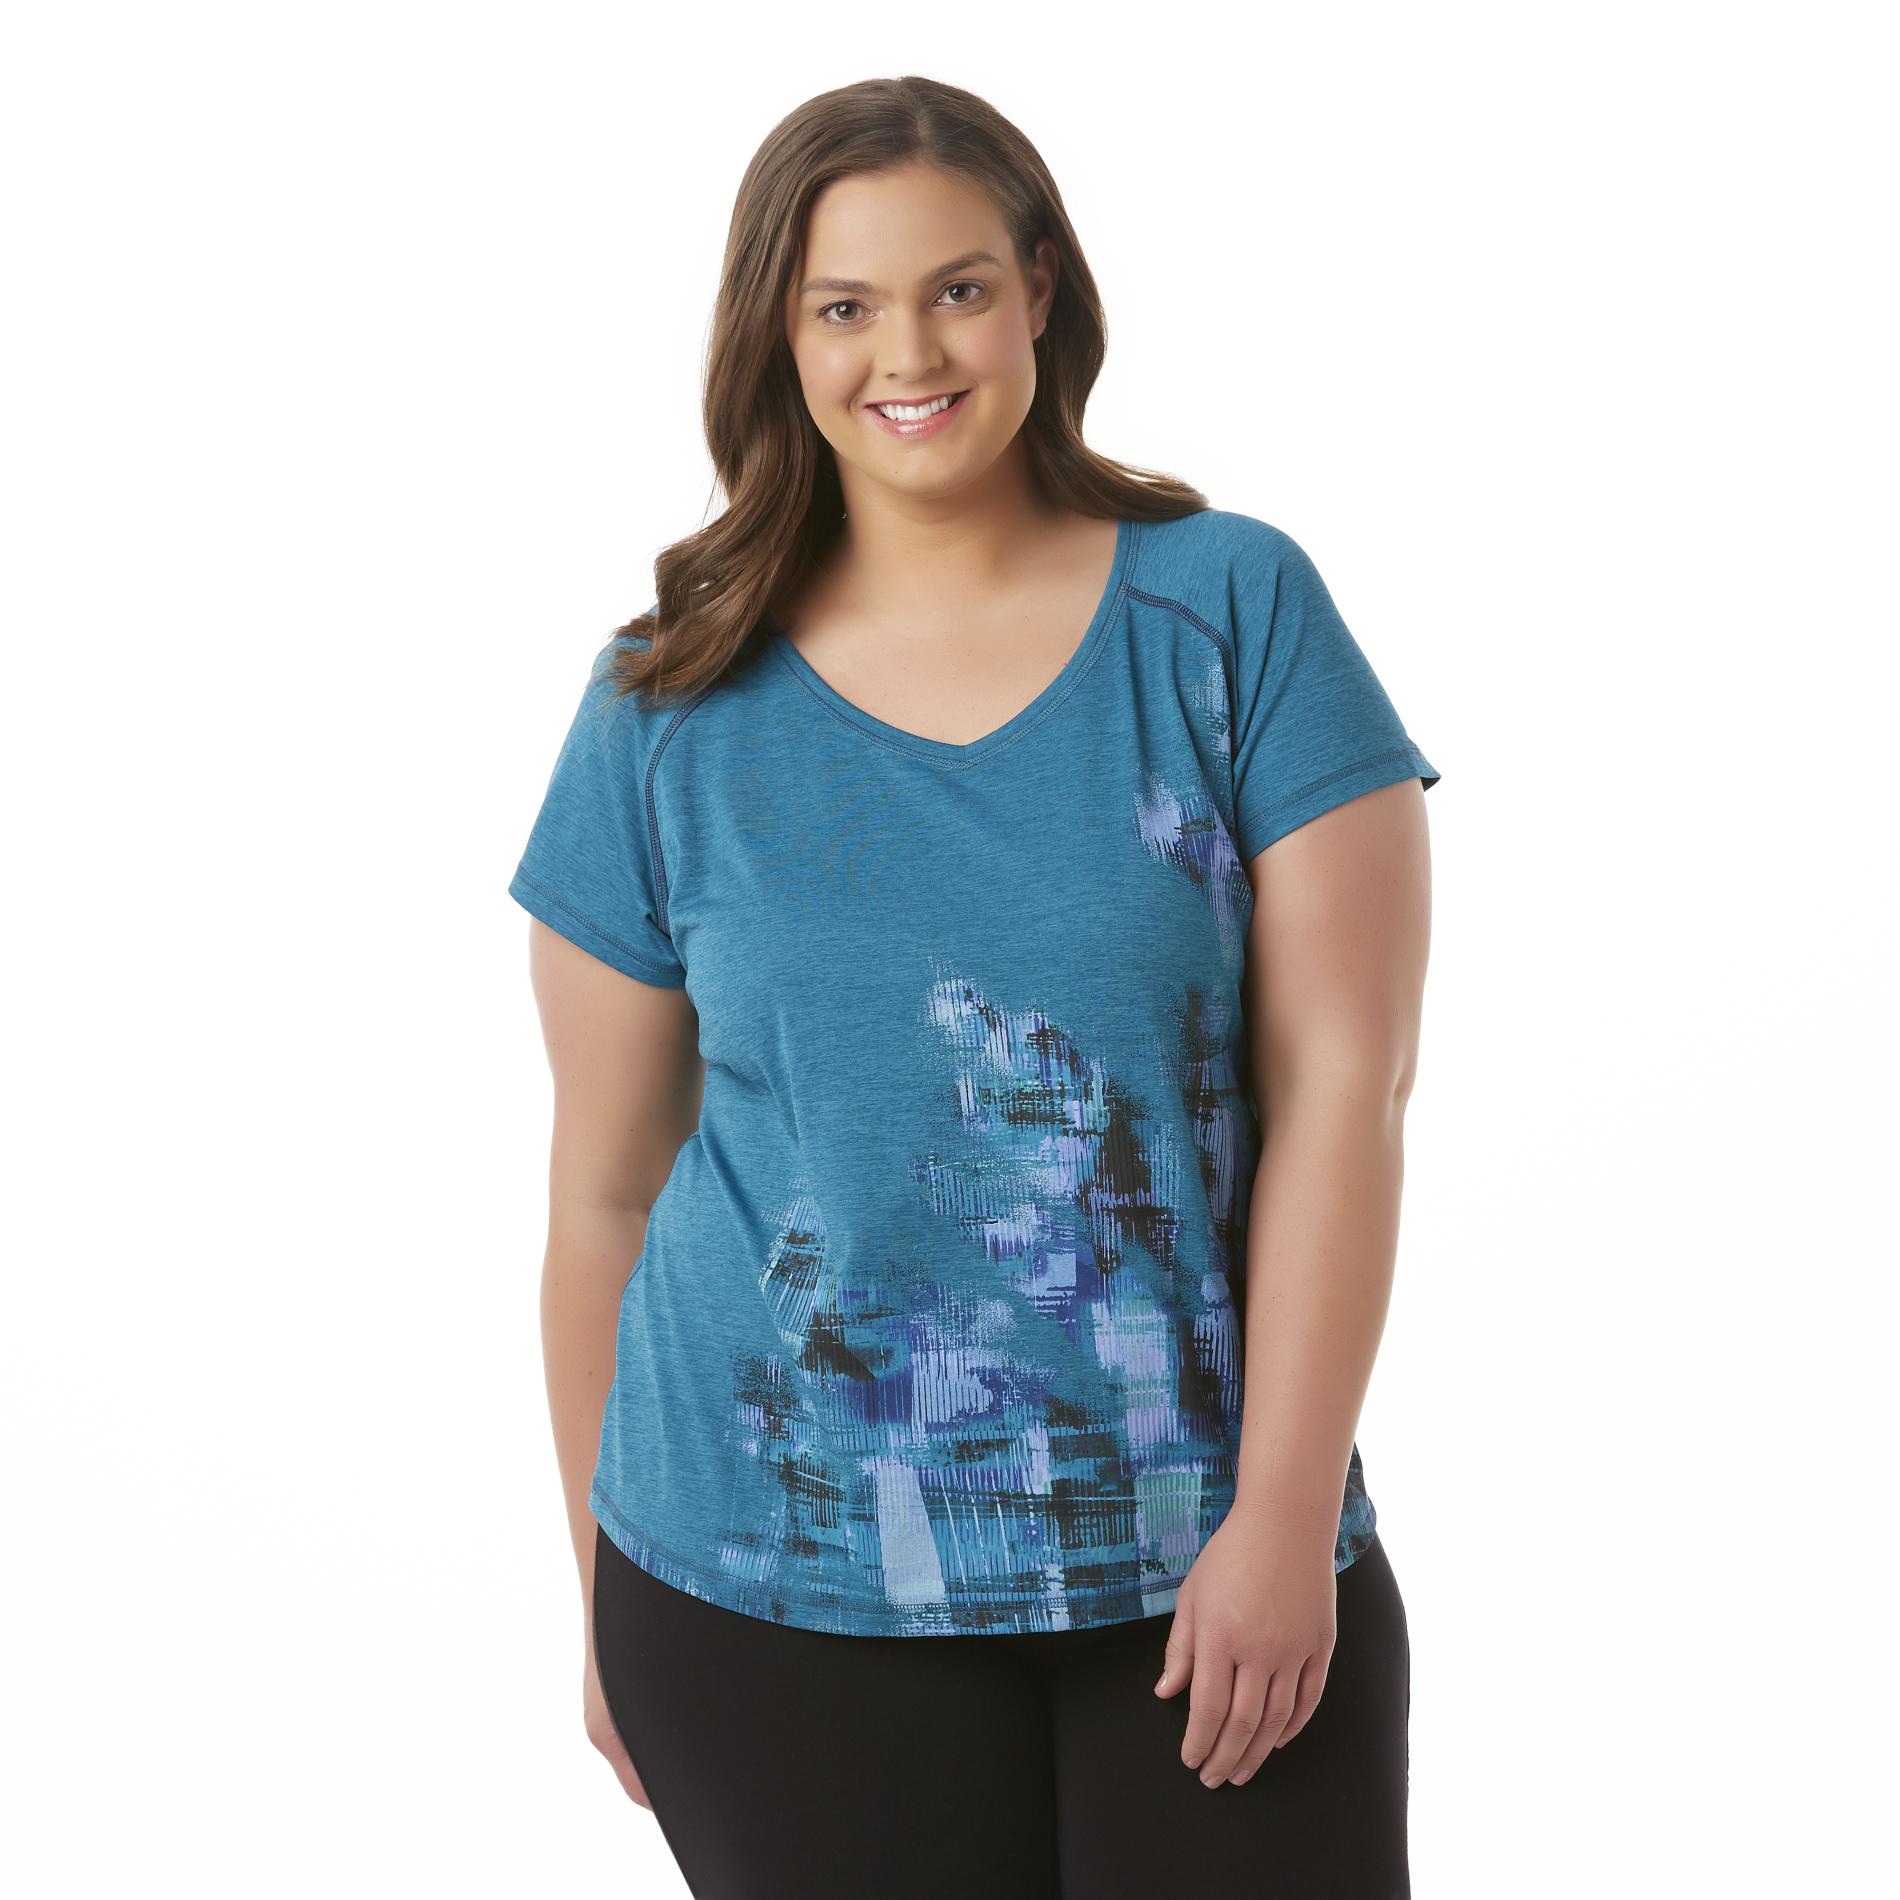 Simply Emma Women's Plus Athletic T-Shirt - Abstract